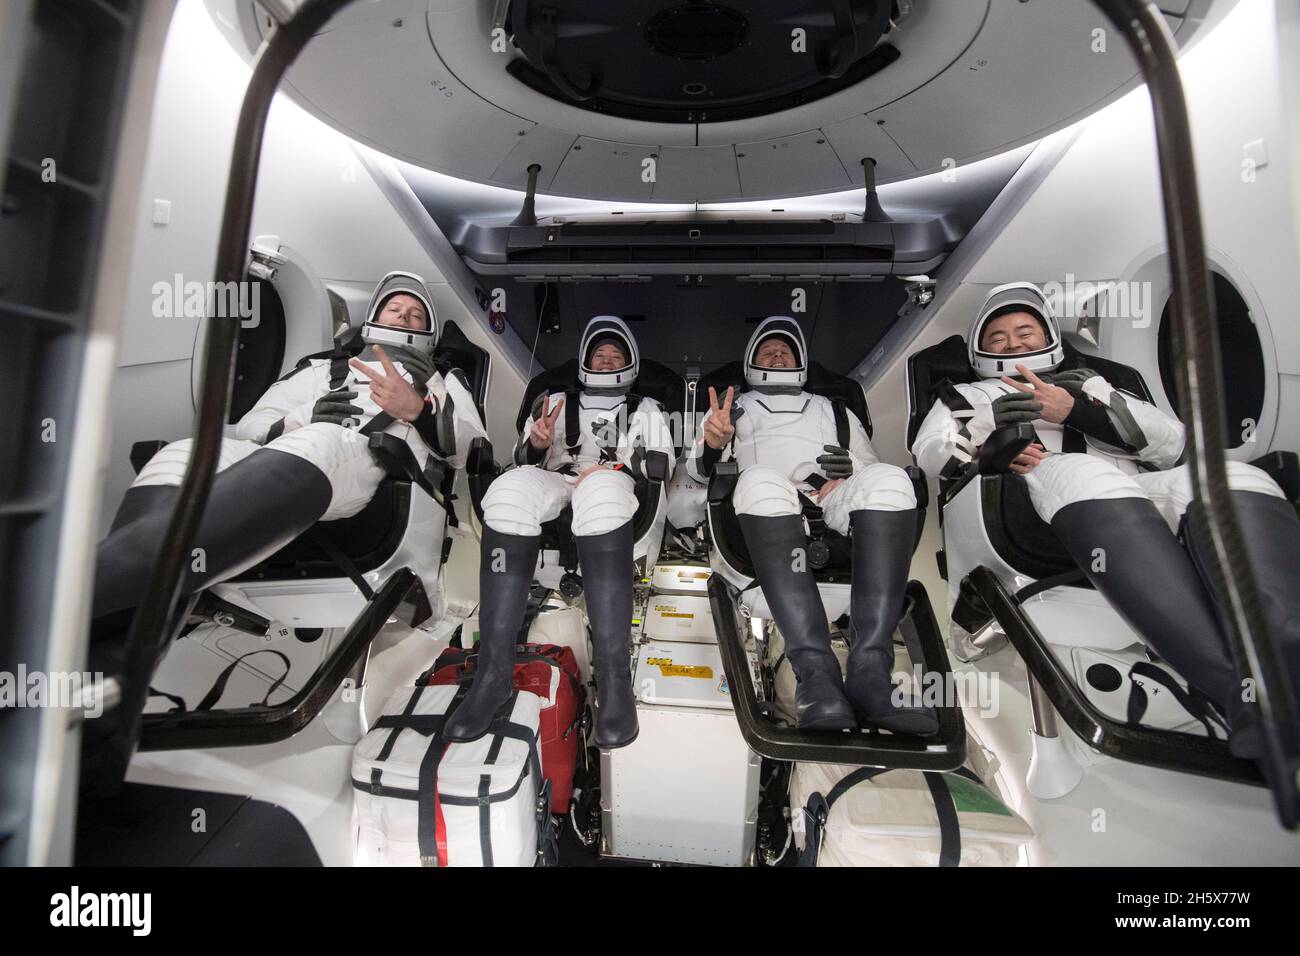 Pensacola, Florida, USA. 8th Nov, 2021. ESA (European Space Agency) astronaut Thomas Pesquet, left, NASA astronauts Megan McArthur and Shane Kimbrough, and Japan Aerospace Exploration Agency (JAXA) astronaut Aki Hoshide, right, are seen inside the SpaceX Crew Dragon Endeavour spacecraft onboard the SpaceX GO Navigator recovery ship shortly after having landed in the Gulf of Mexico off the coast of Pensacola. Credit: Aubrey Gemignani/NASA/ZUMA Wire/ZUMAPRESS.com/Alamy Live News Stock Photo